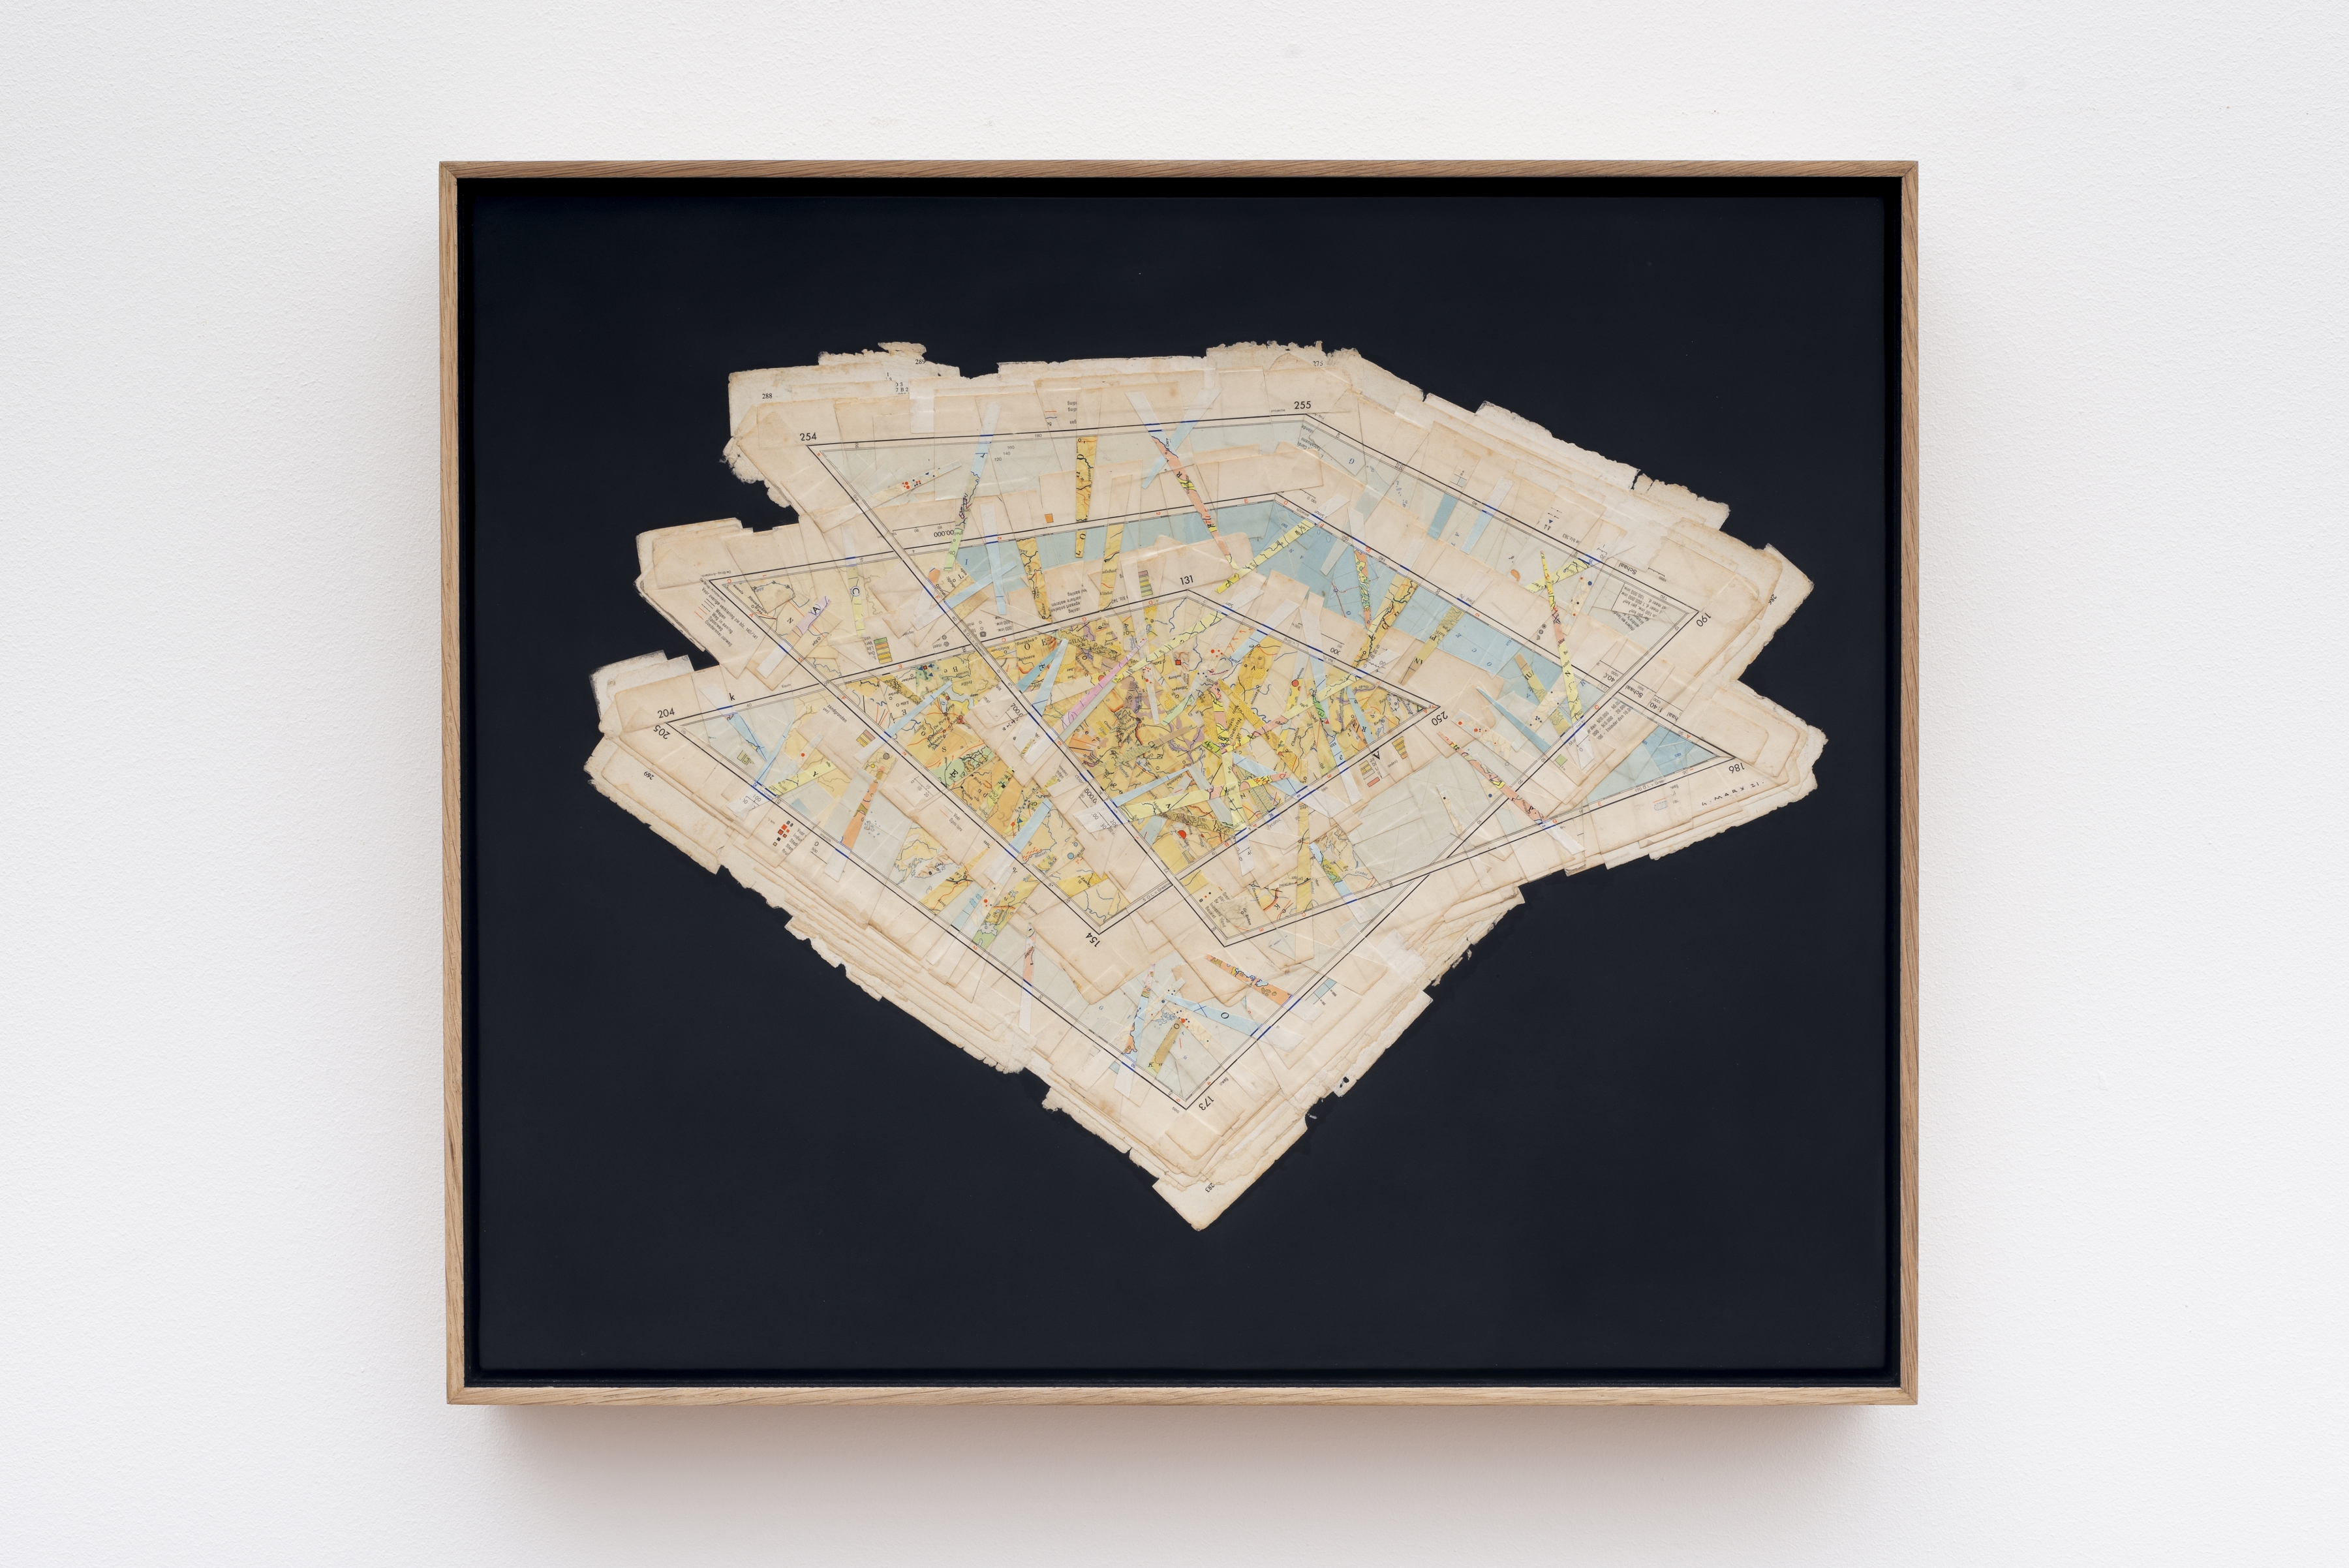 The same place three times, 2021&amp;nbsp;

Reconfigured map fragments on canvas&amp;nbsp;

53 x 63 x 7.5 cm / 20.8 x 24.8 x 3 in.

Enquire